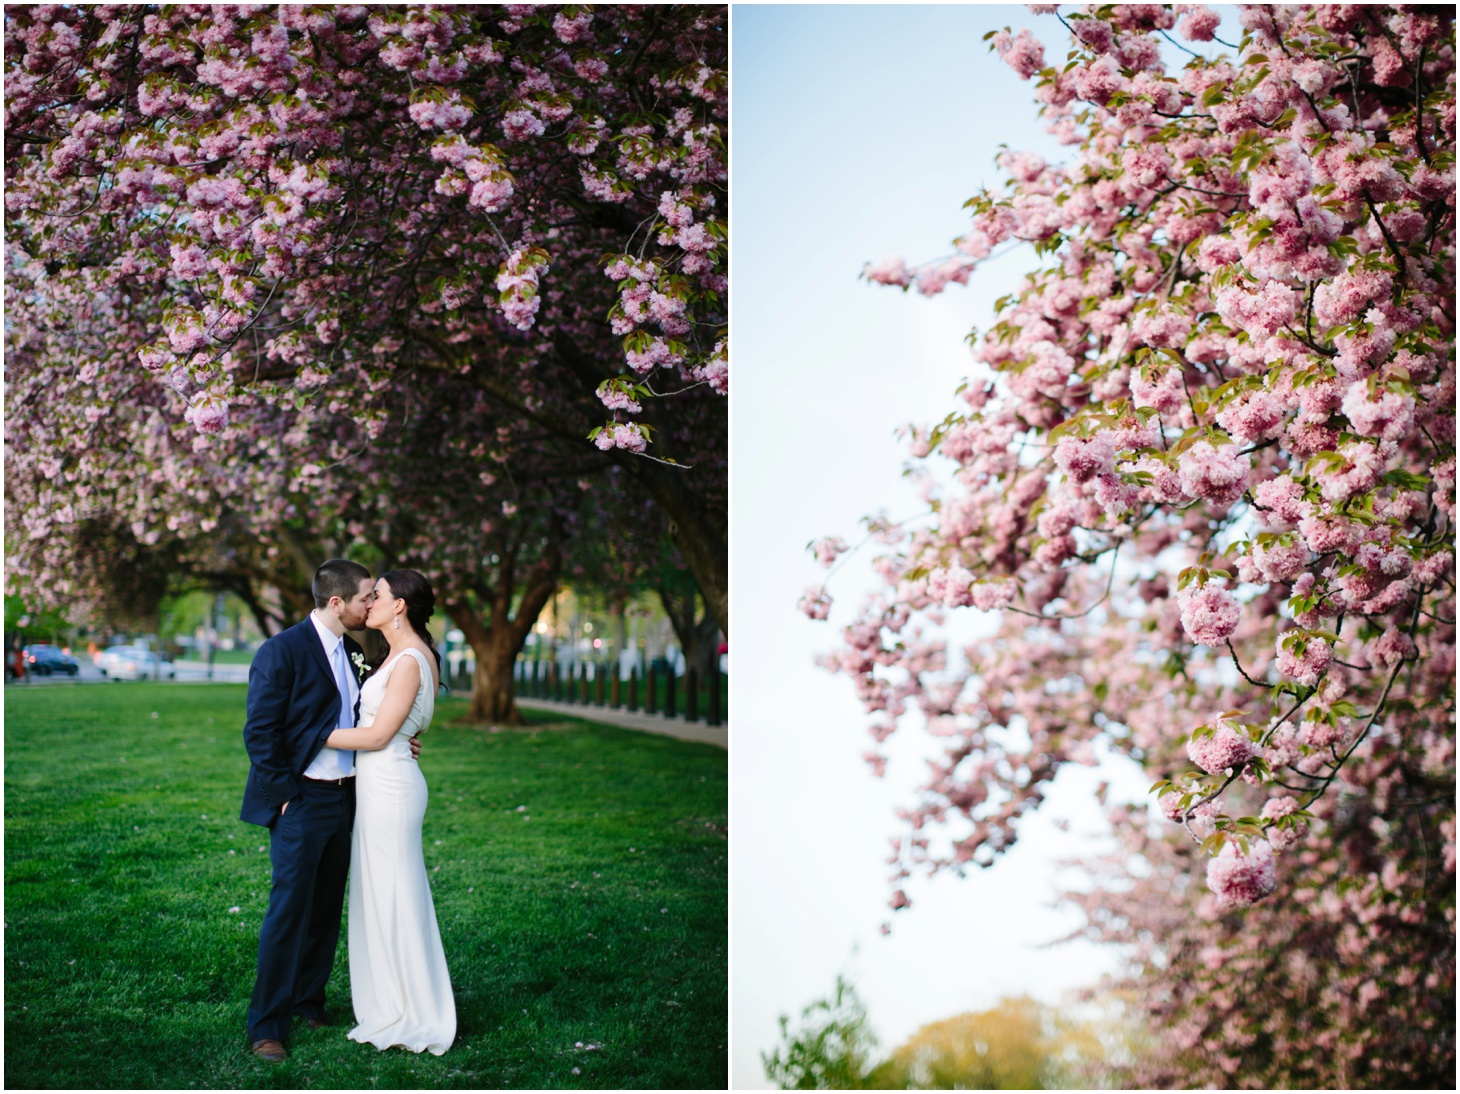 Mikey & Megan, Downtown DC Wedding at National Museum of Women in the Arts by Sarah Bradshaw Photography_0041.jpg